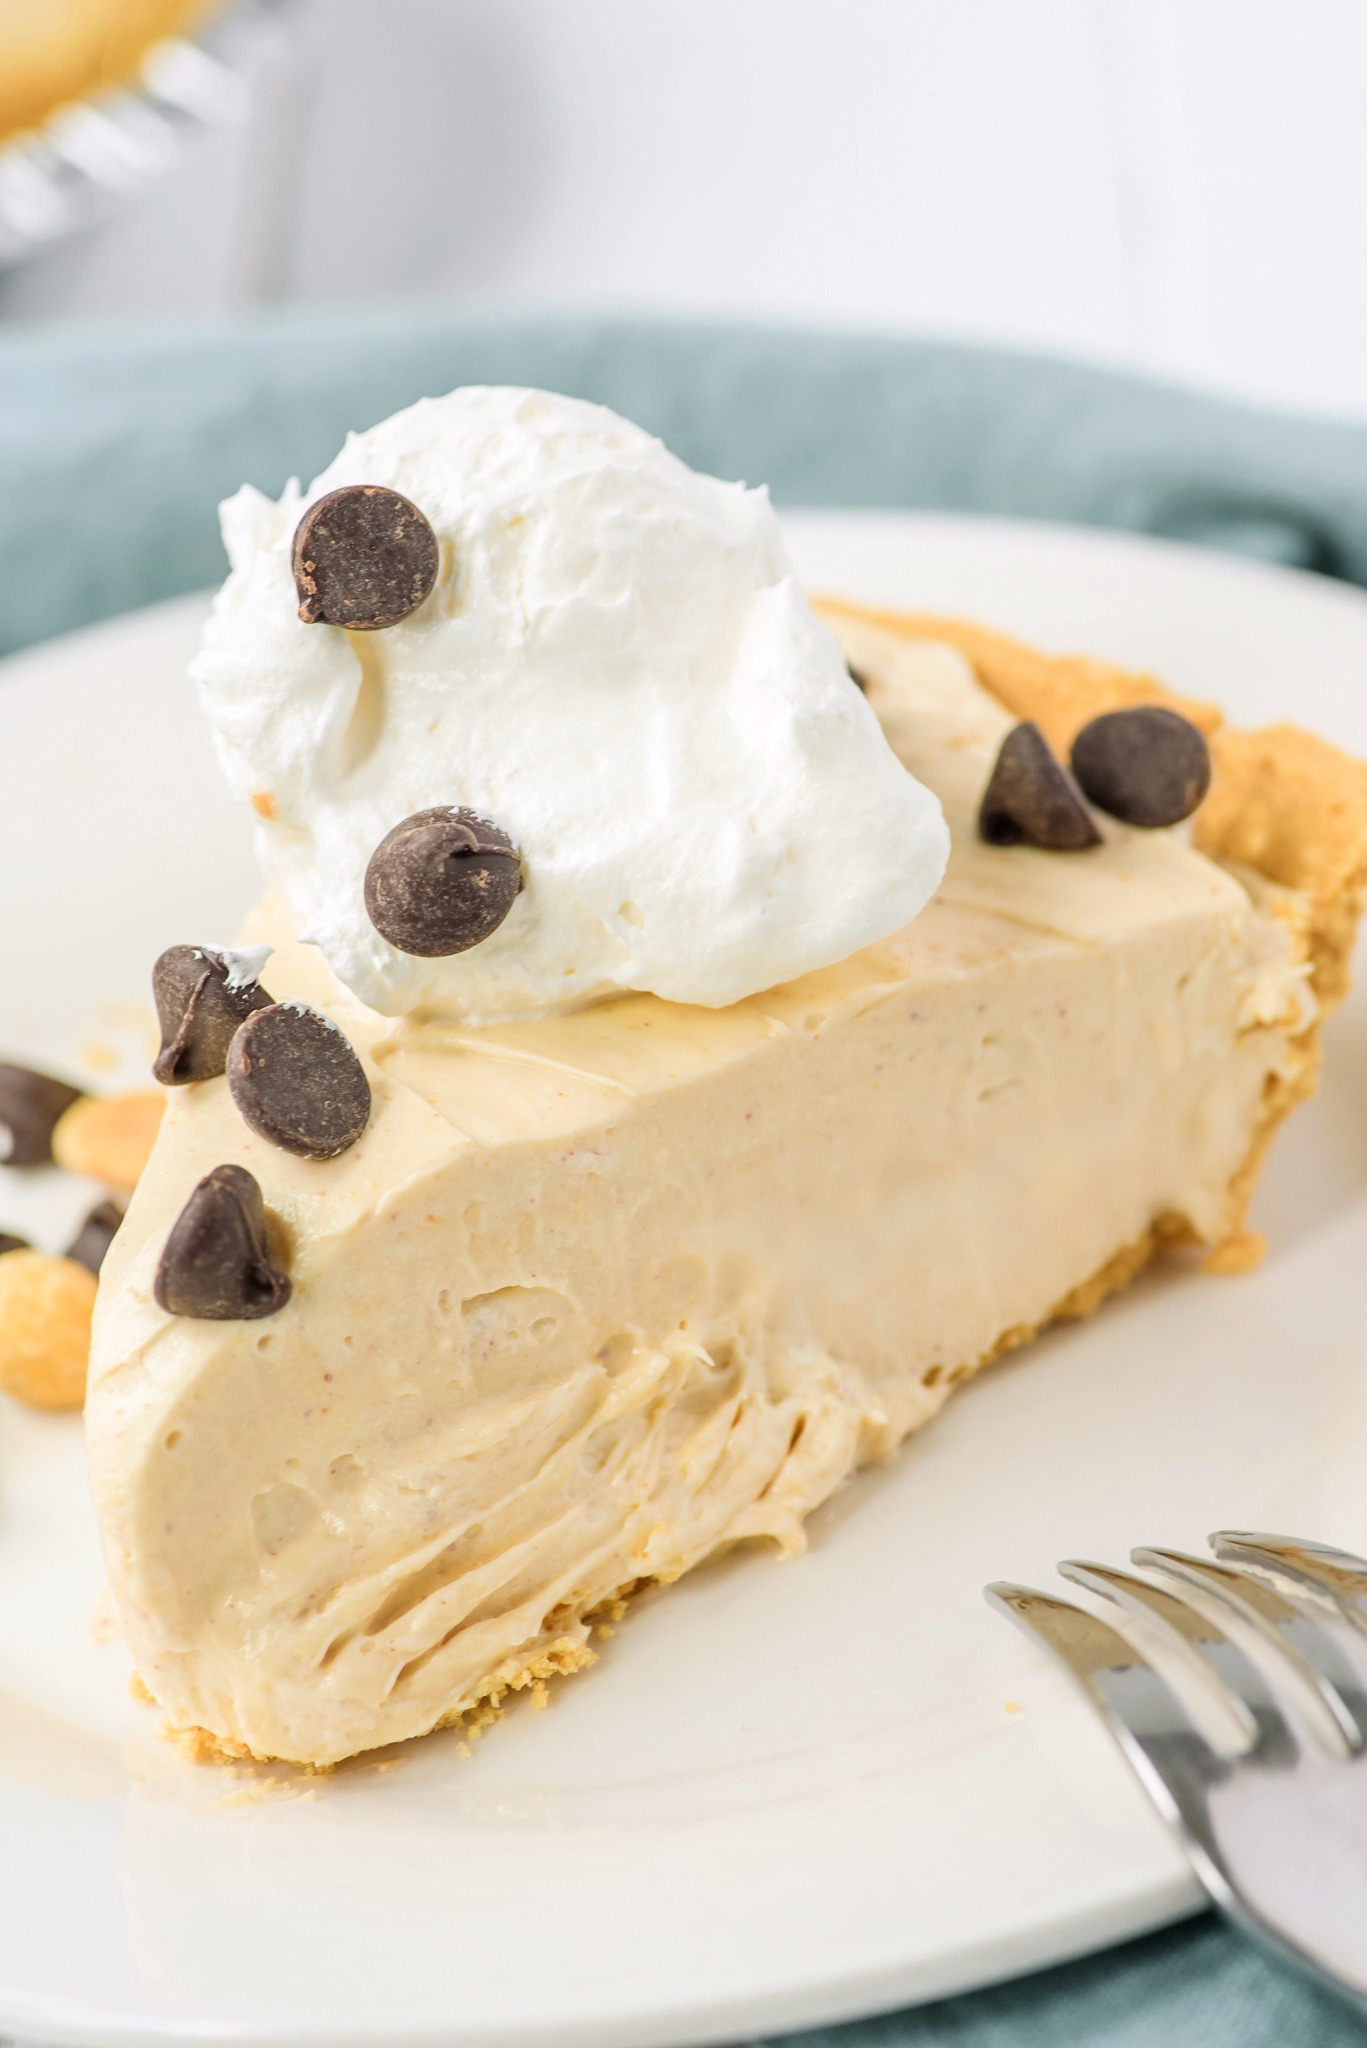 Smooth and creamy peanut butter mixture in a graham cracker crust with a dollop of whipped cream